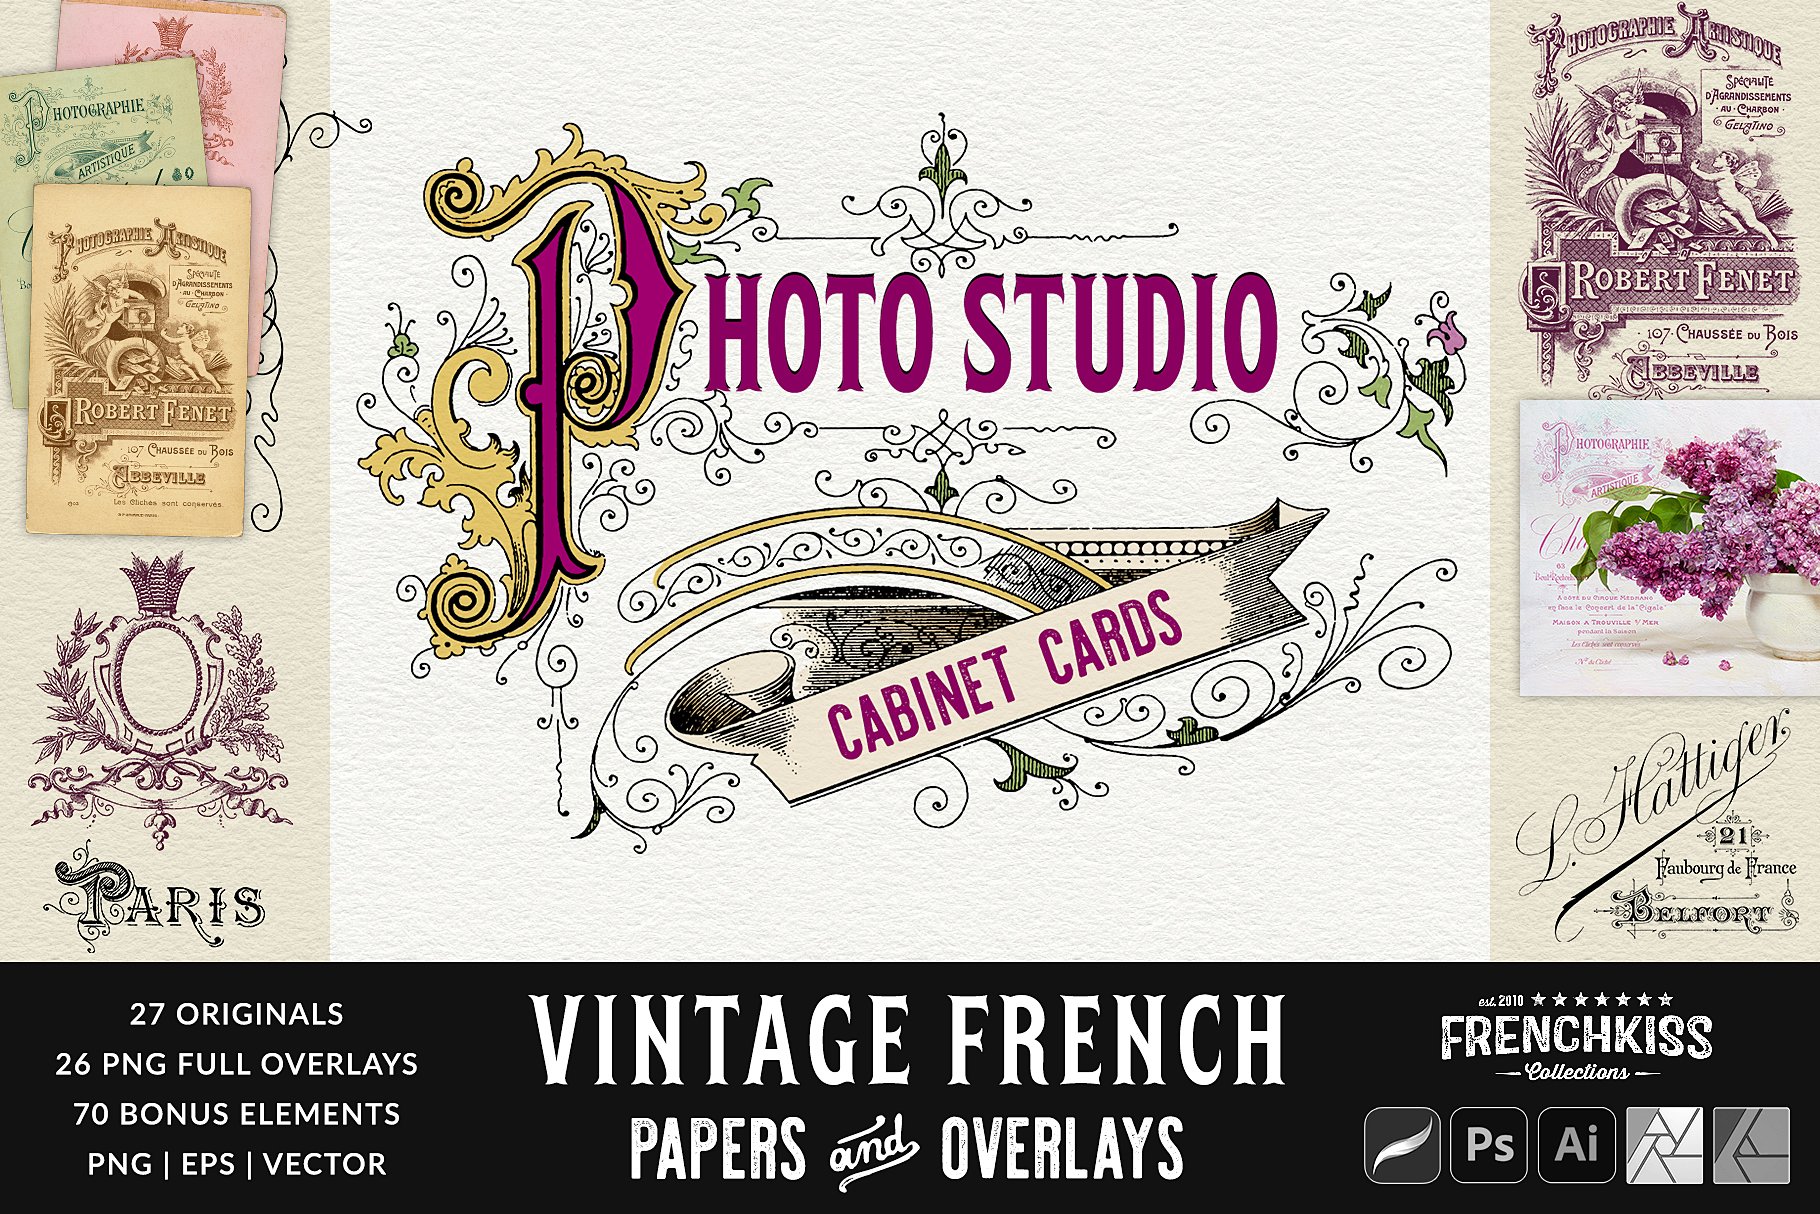 Vintage French Photo Studio Papers And Overlays